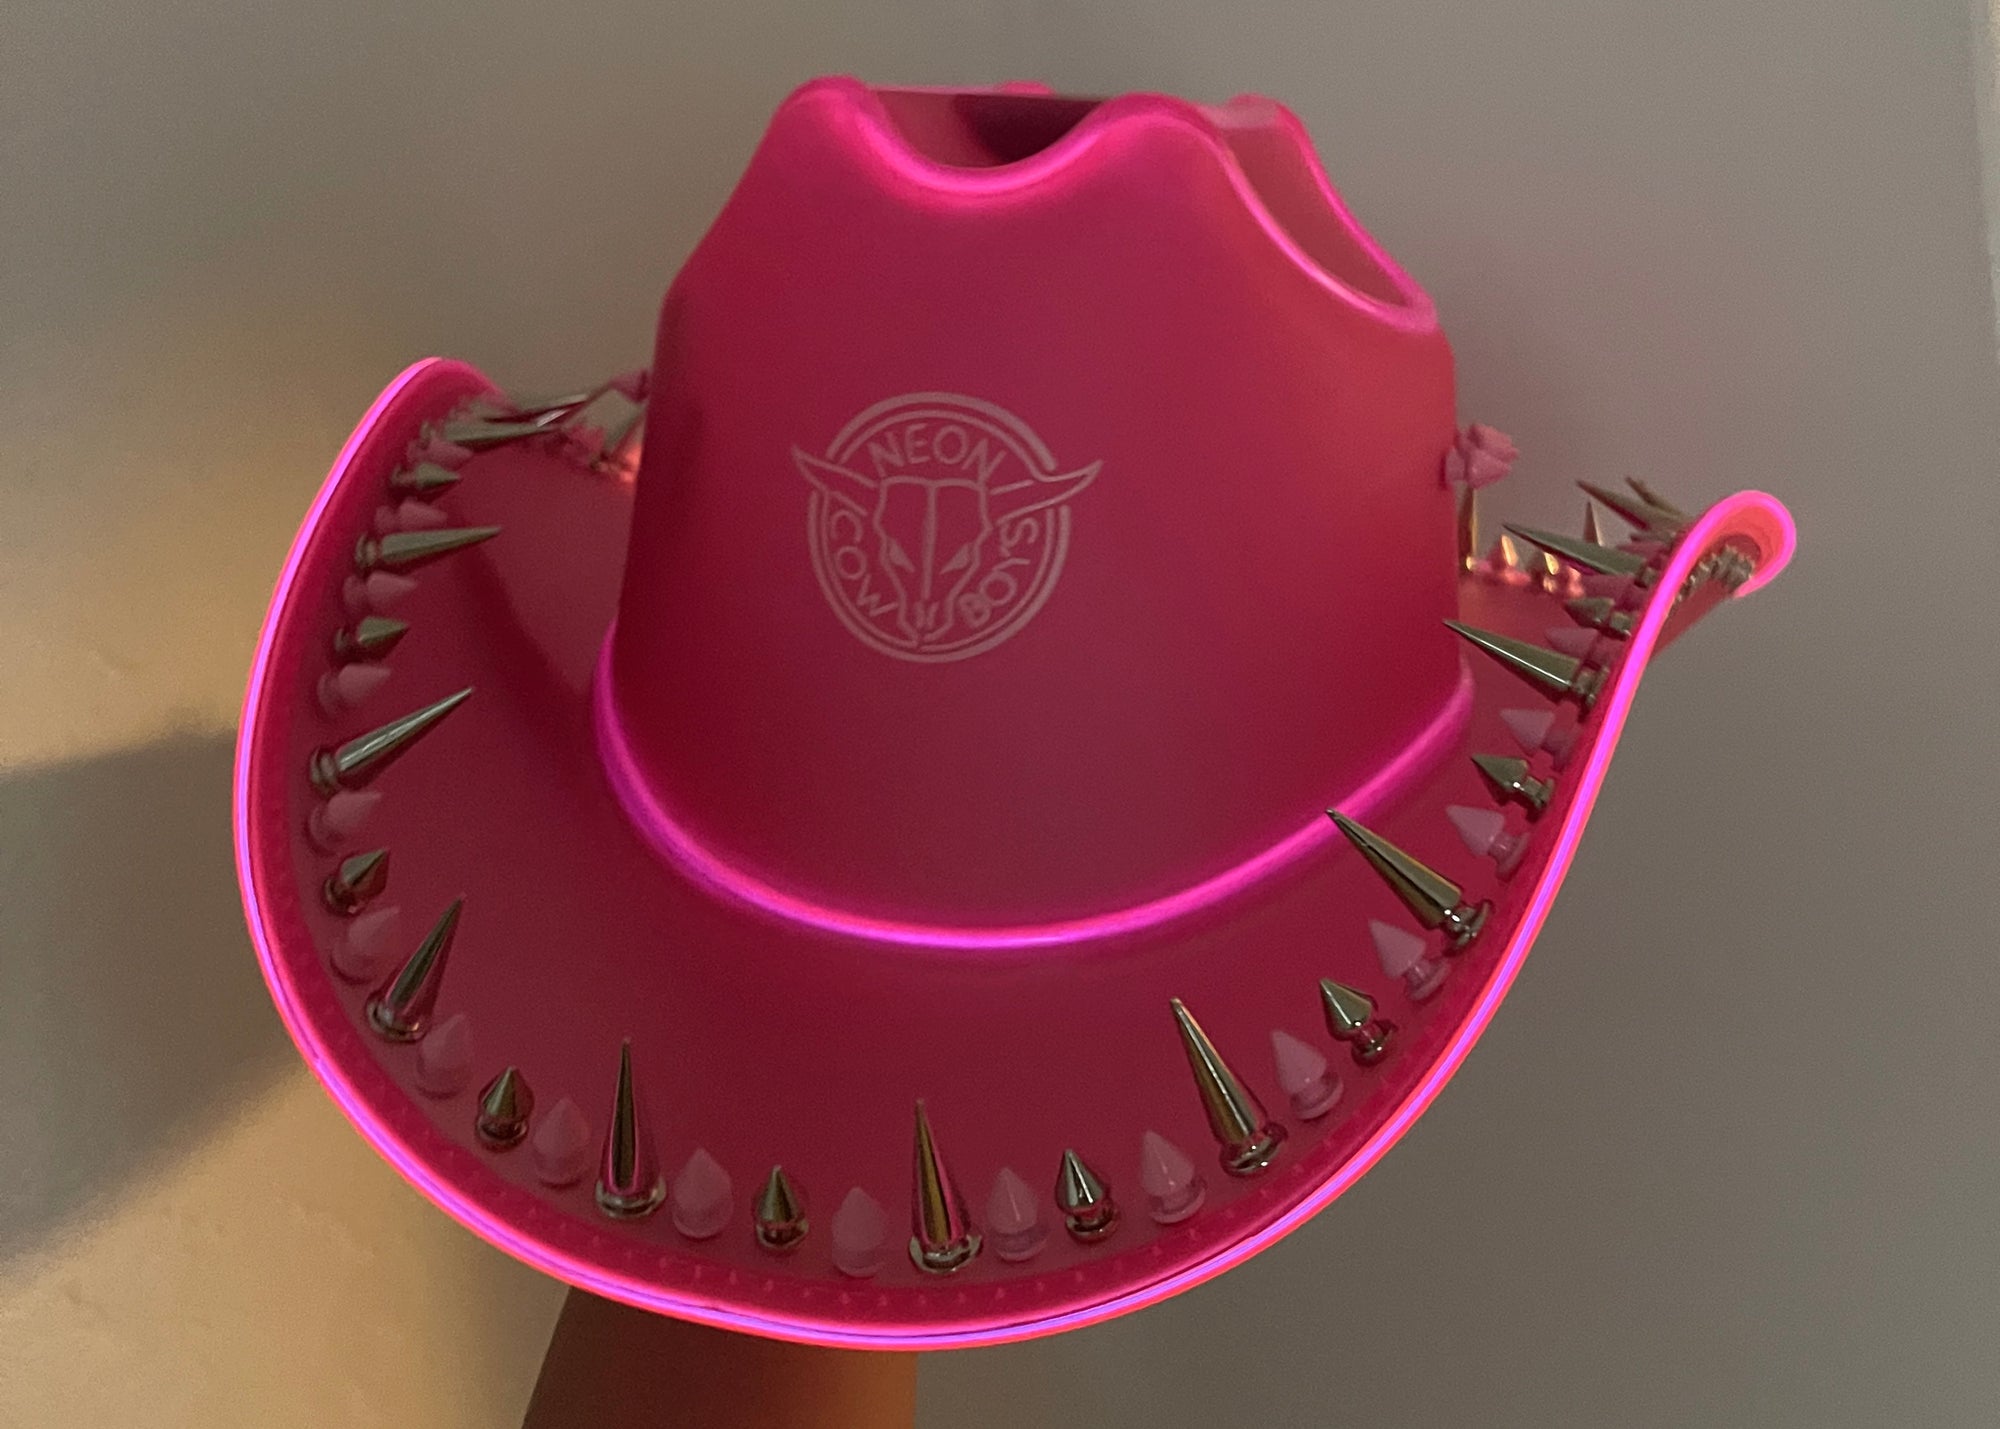 Spike Up your Neon Cowboys Hat